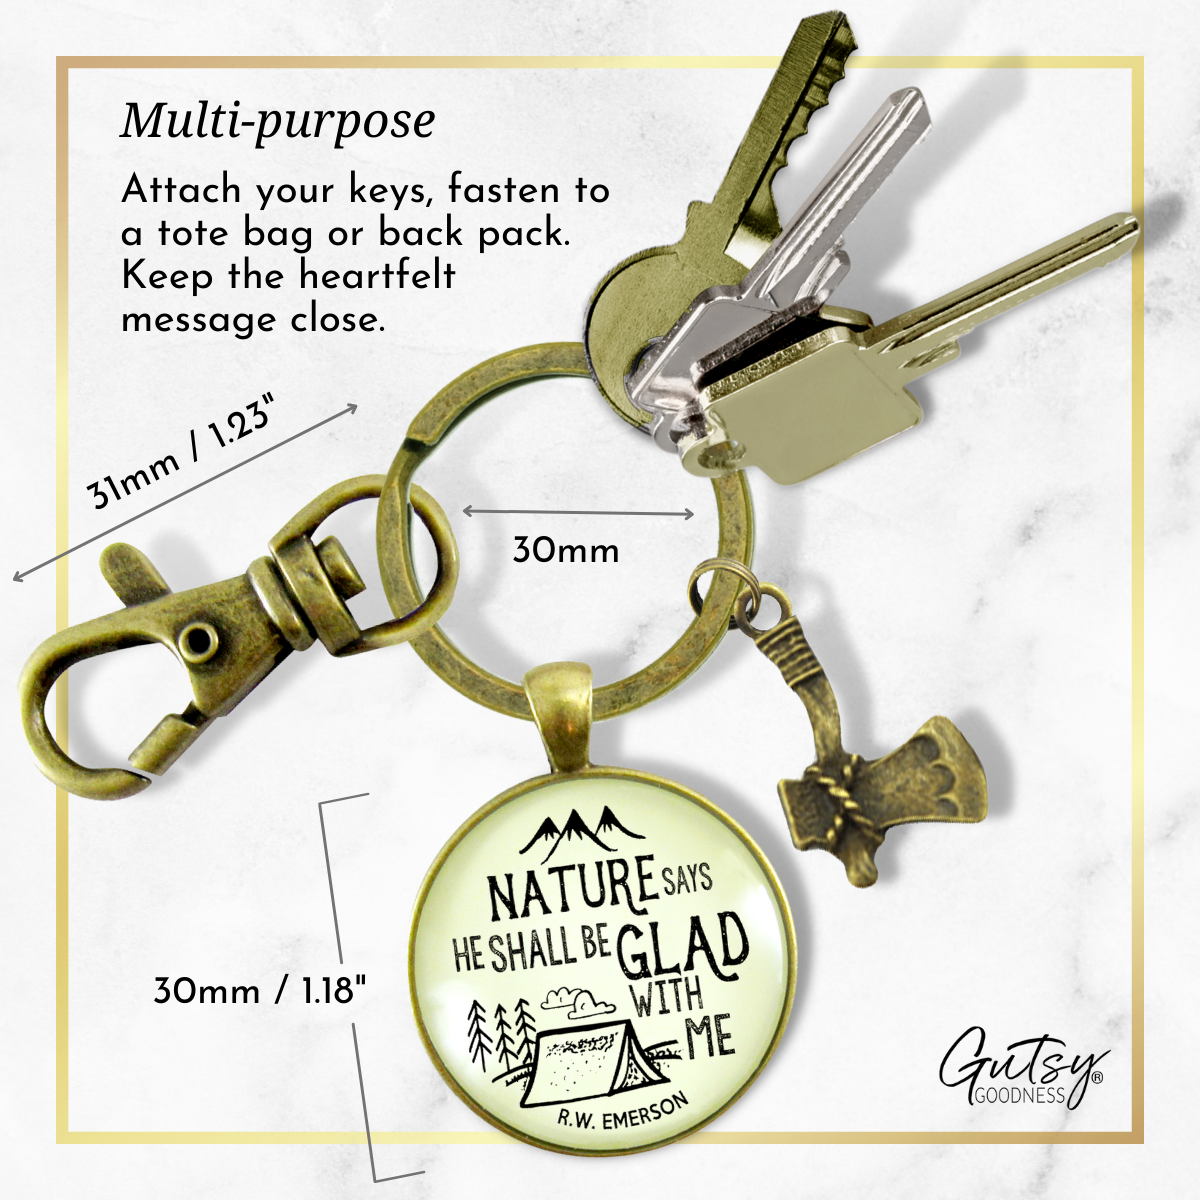 Mens Keychain Nature Camping Tent Rustic Bronze Key Fob Dad Outdoorsman Gift Axe Charm - Gutsy Goodness Handmade Jewelry;Mens Keychain Nature Camping Tent Rustic Bronze Key Fob Dad Outdoorsman Gift Axe Charm - Gutsy Goodness Handmade Jewelry Gifts